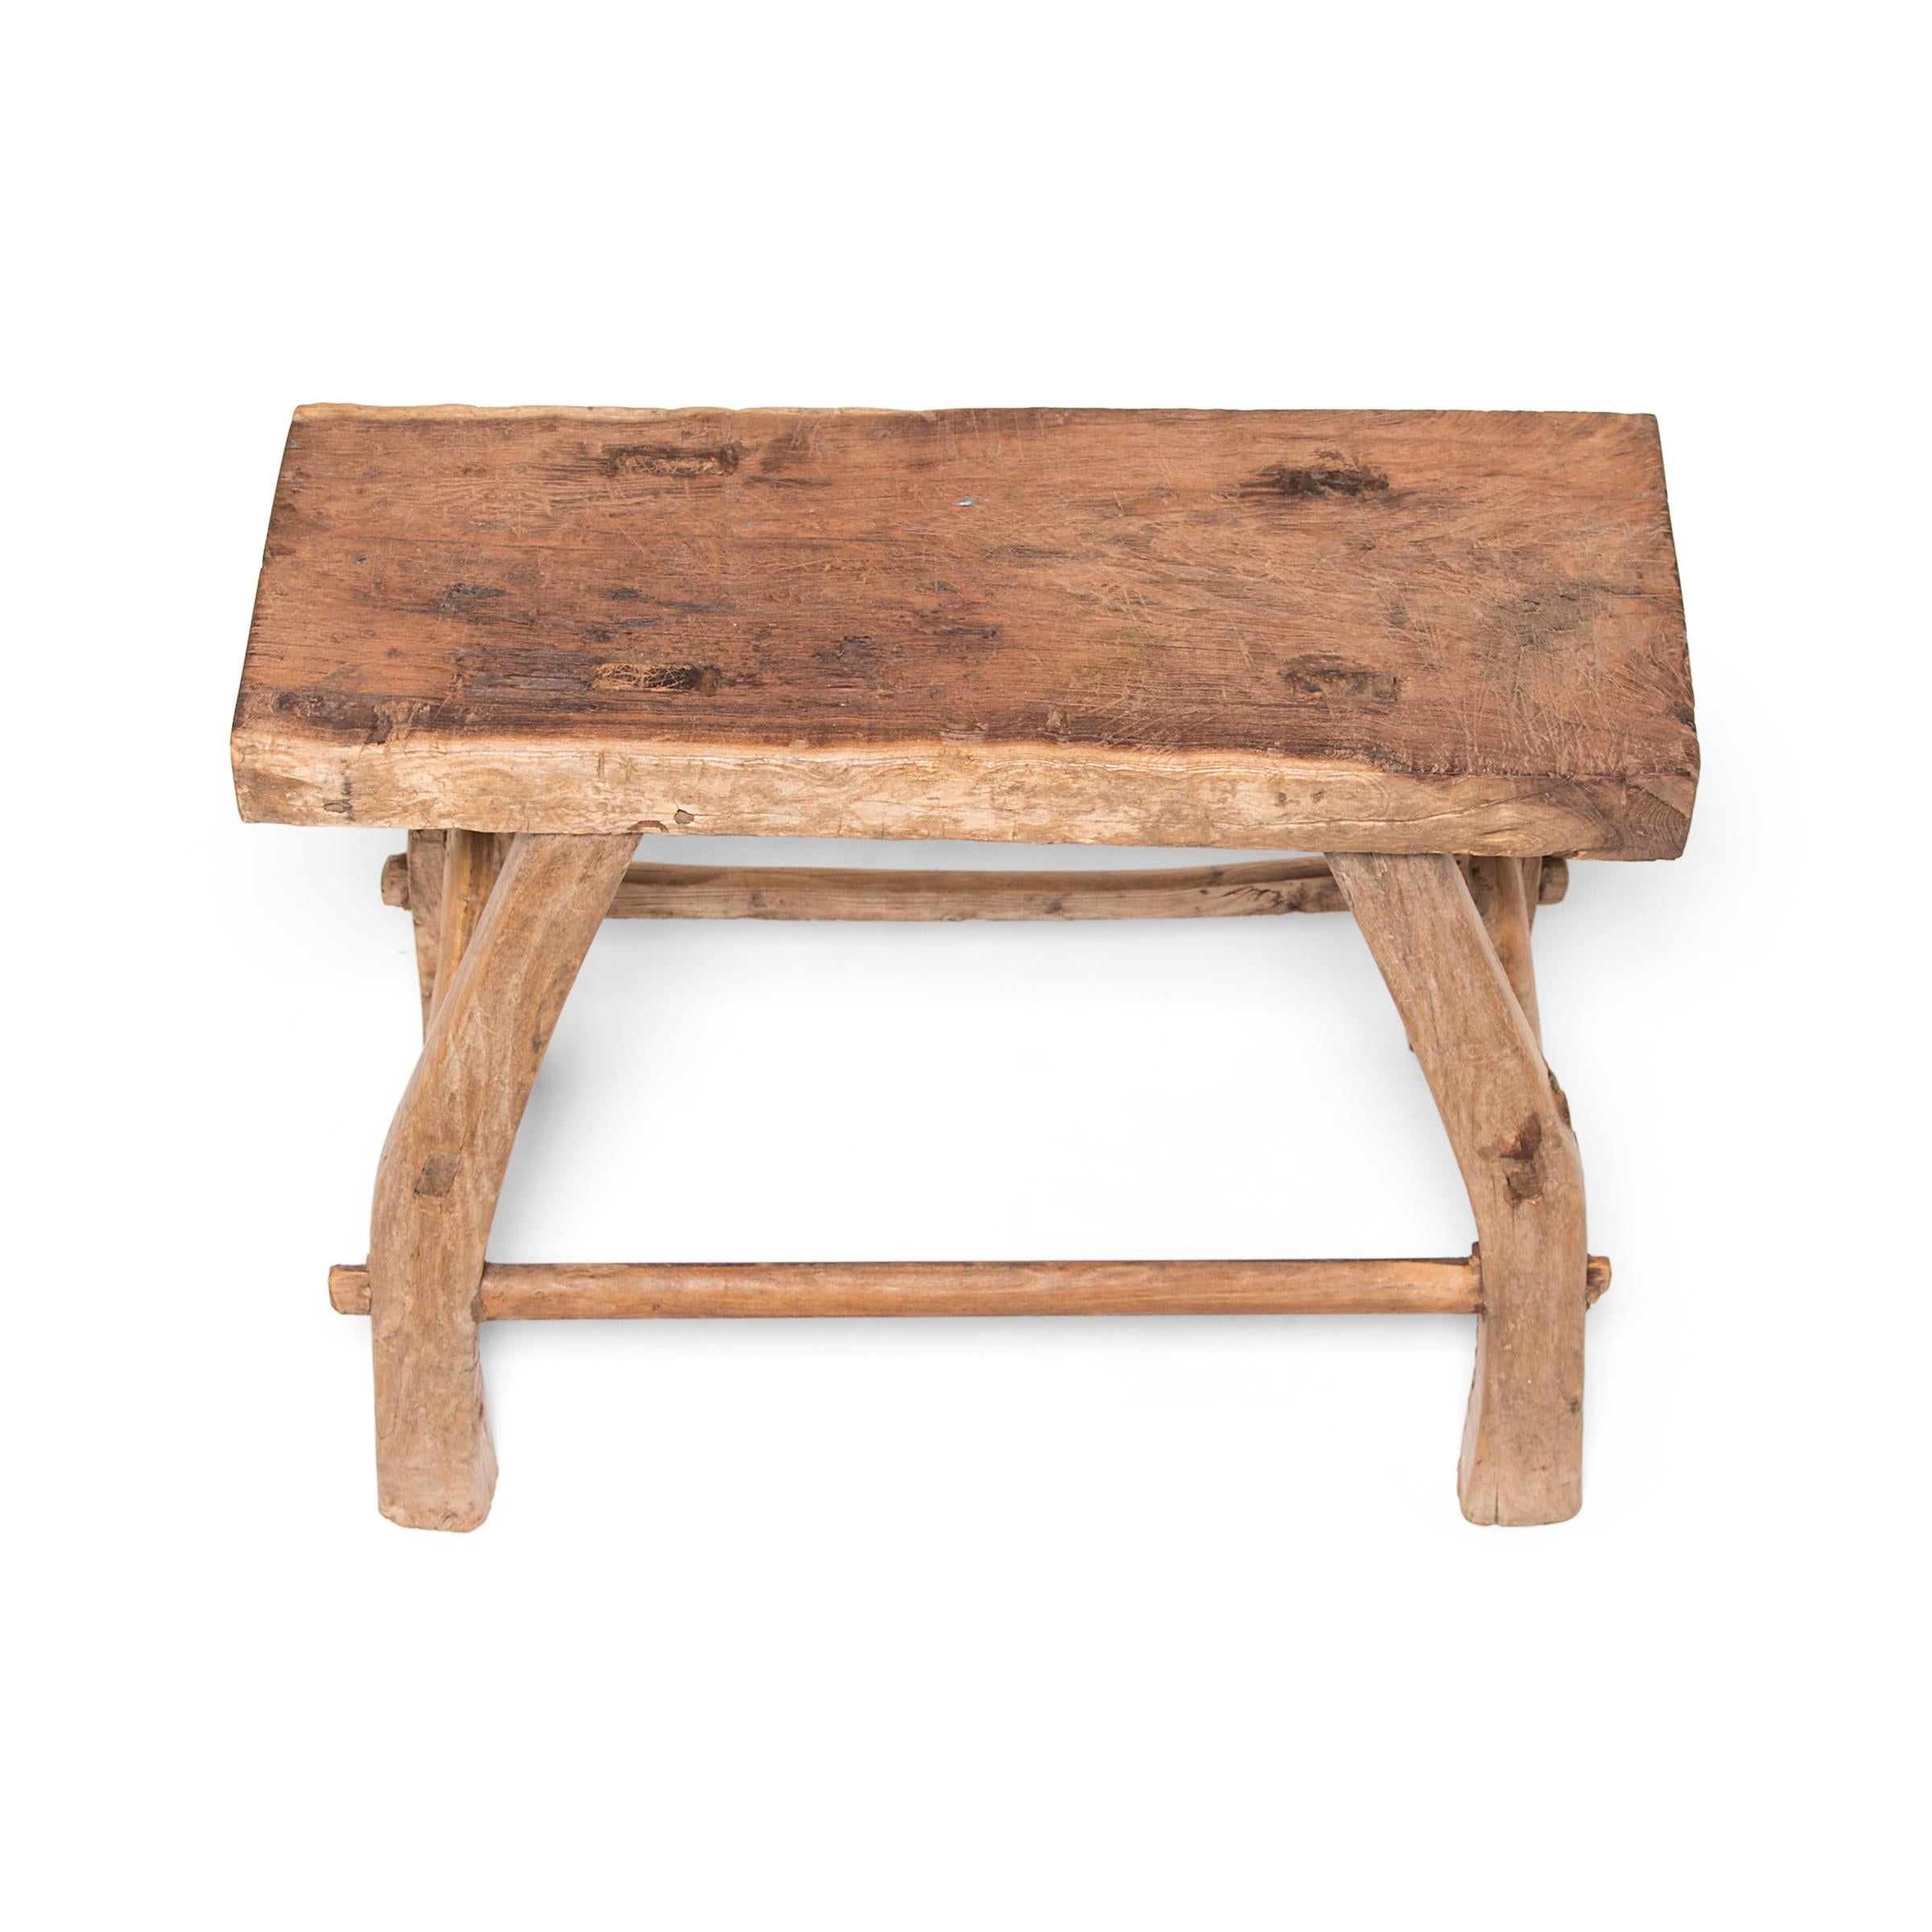 20th Century Provincial Chinese Work Stool